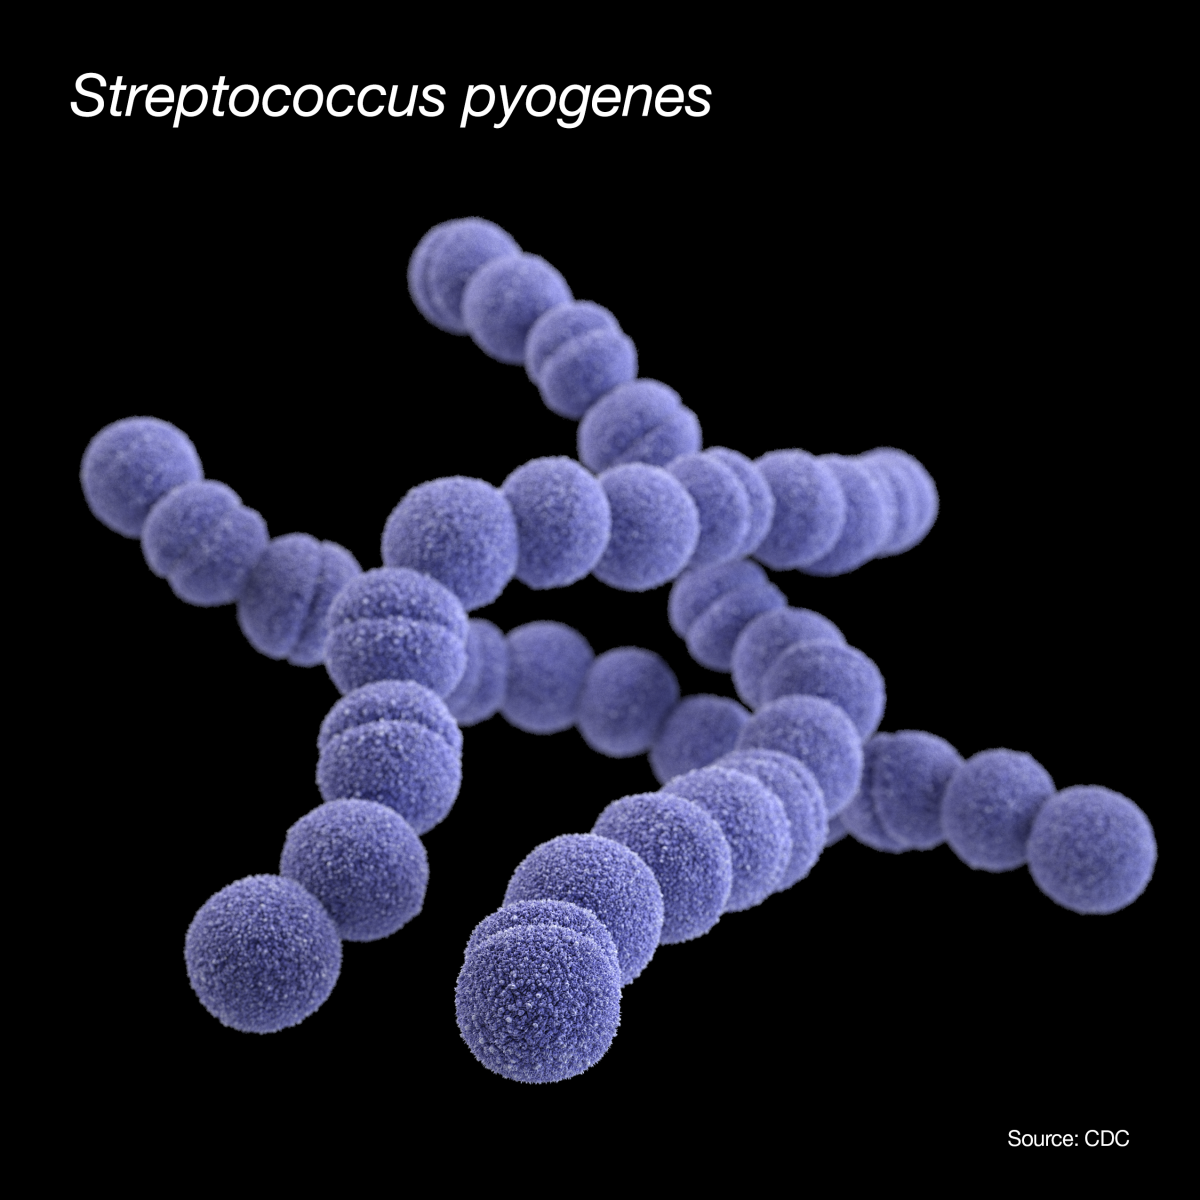 A computer-generated image of a group of Gram-positive group A Streptococcus bacteria.